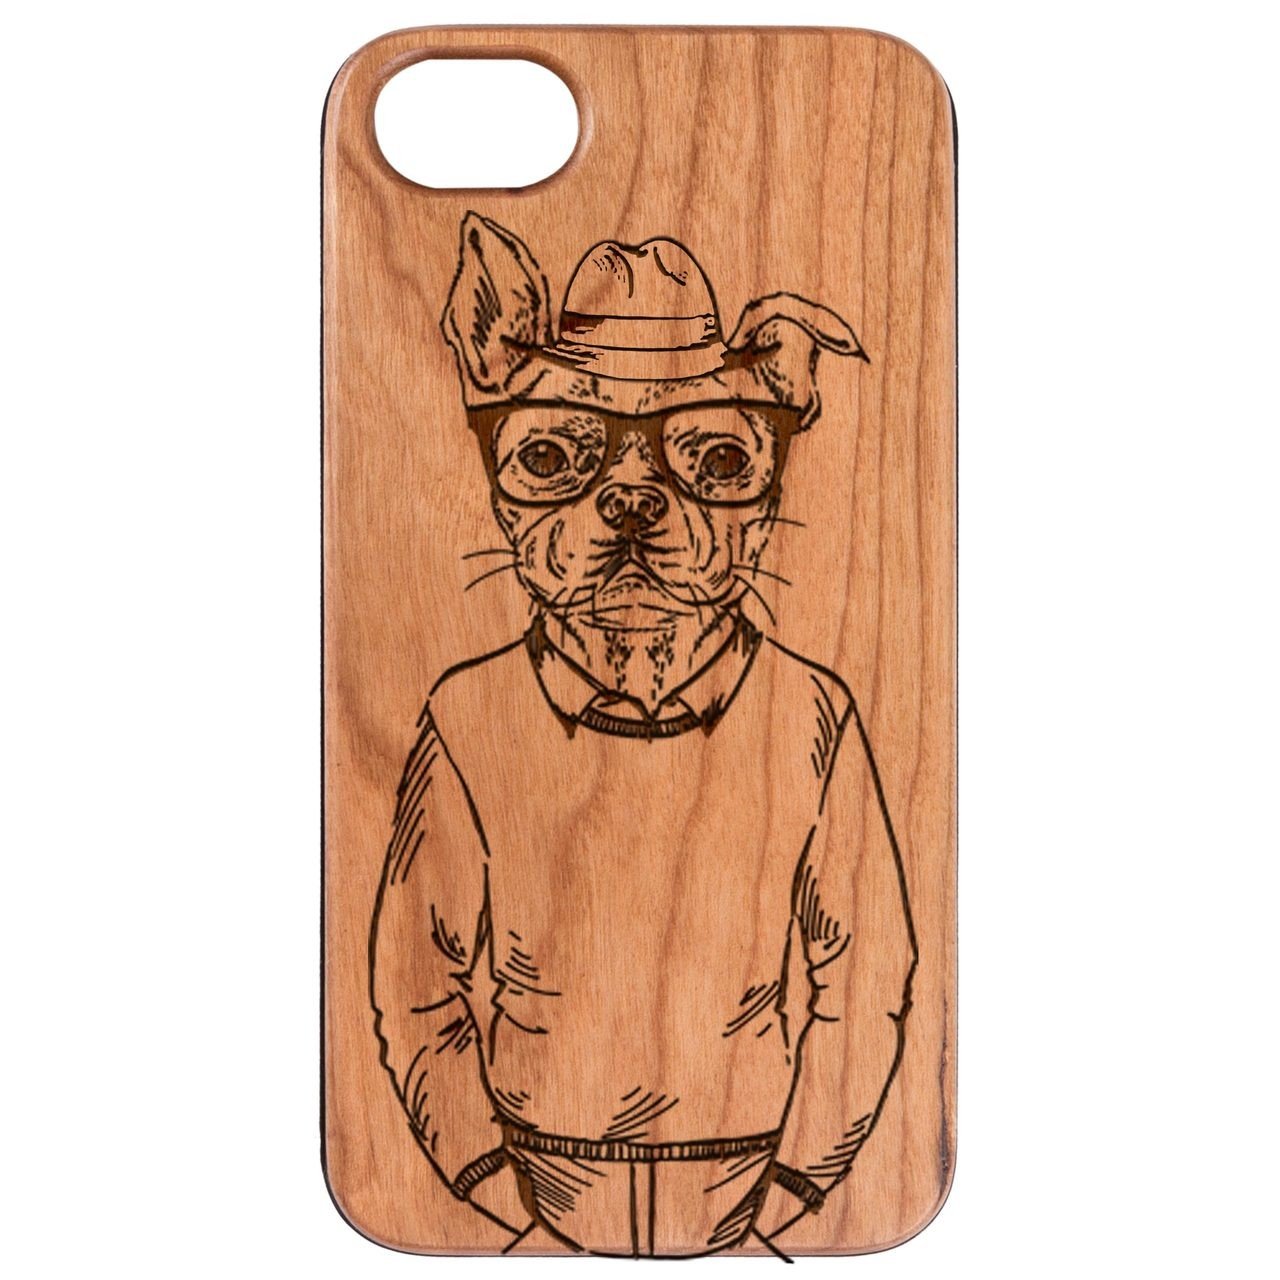 Dogman - Engraved - Wooden Phone Case